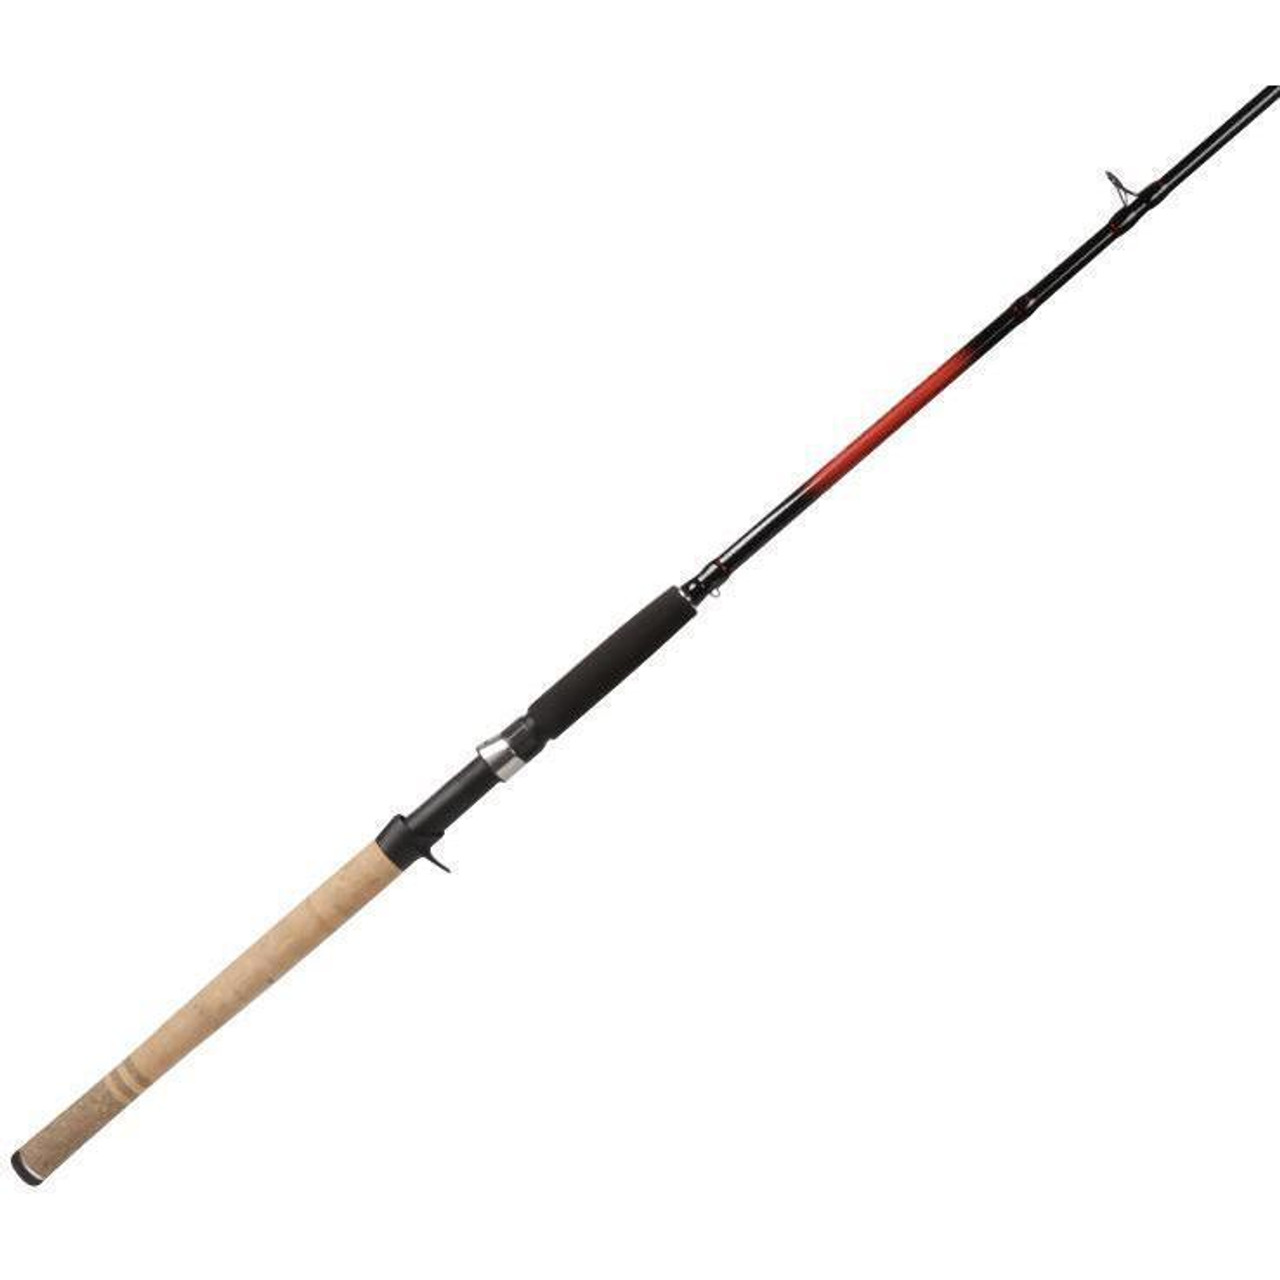 https://cdn11.bigcommerce.com/s-70mih4s/images/stencil/1280x1280/products/15572/51436/Shimano-Sojourn-Musky-Baitcaster-Rods-022255043236_image1__15982.1617055036.jpg?c=2